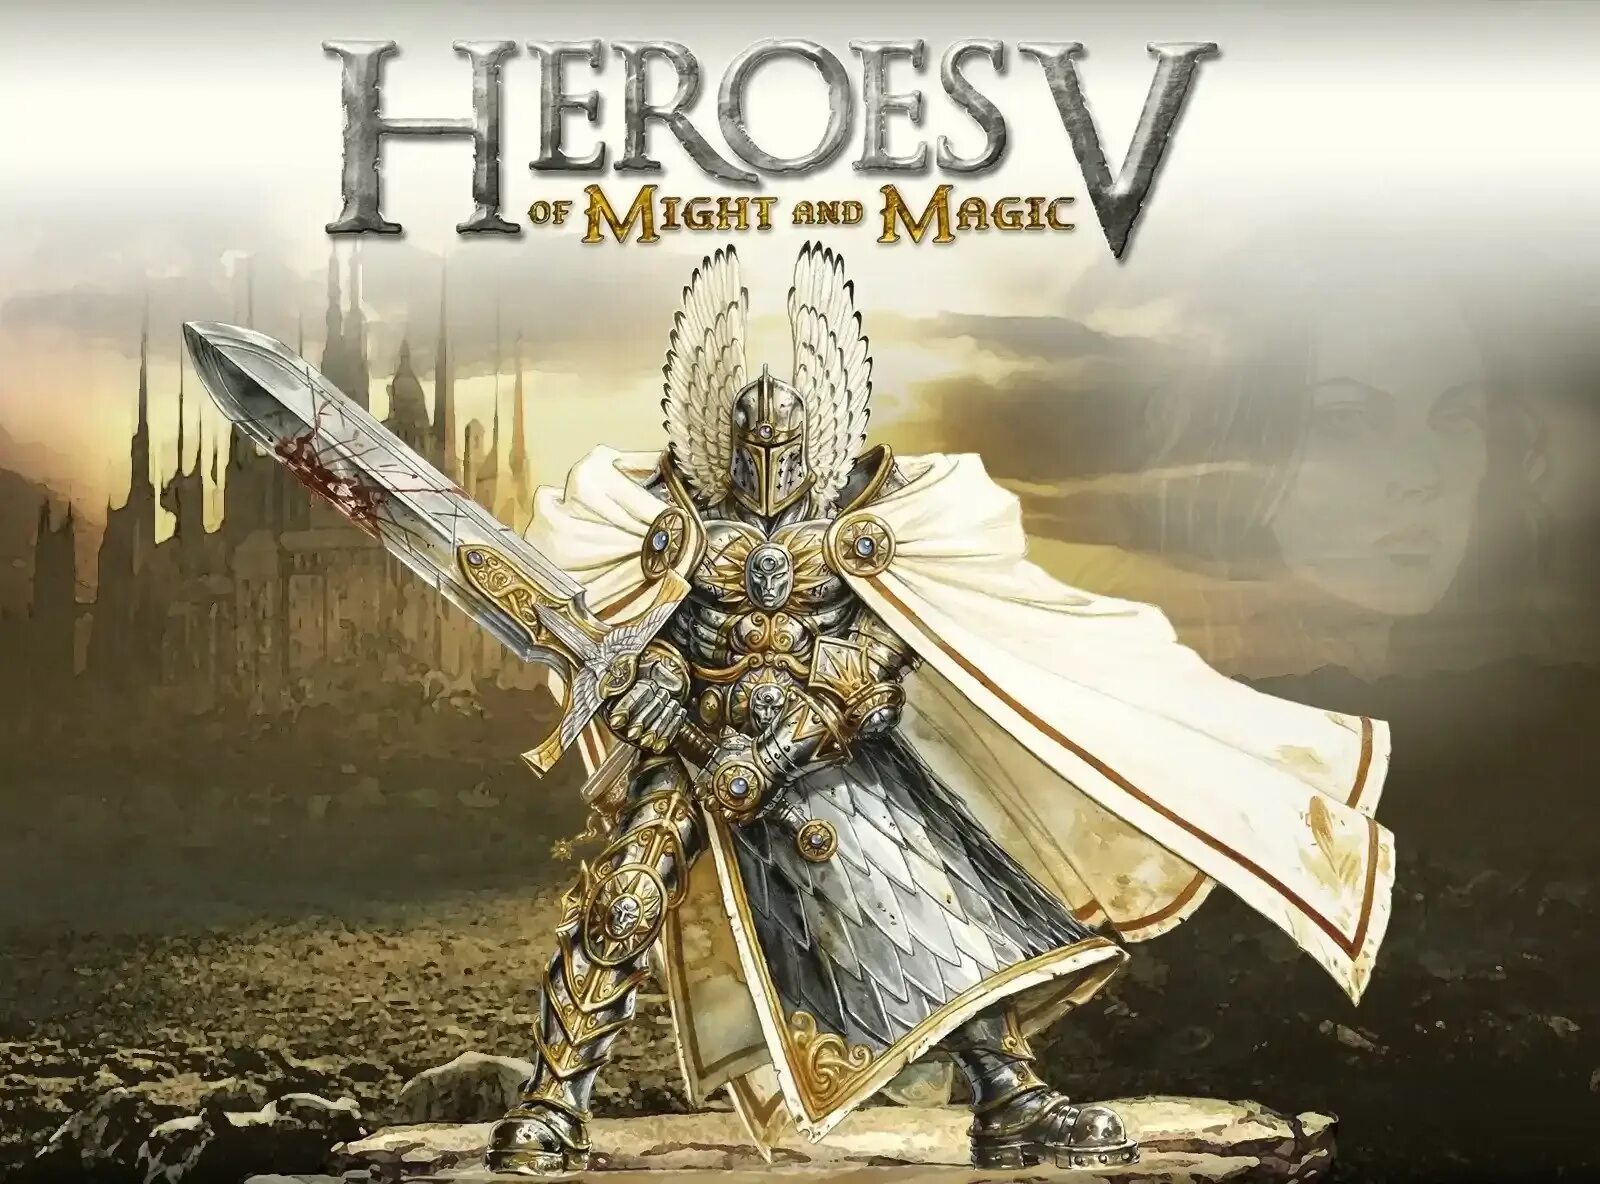 Heroes of might and magic gold. Герои меча и магии 5. Игра Heroes of might and Magic 5. Heroes of might and Magic 5 диск. Герои меча меча и магии 5.